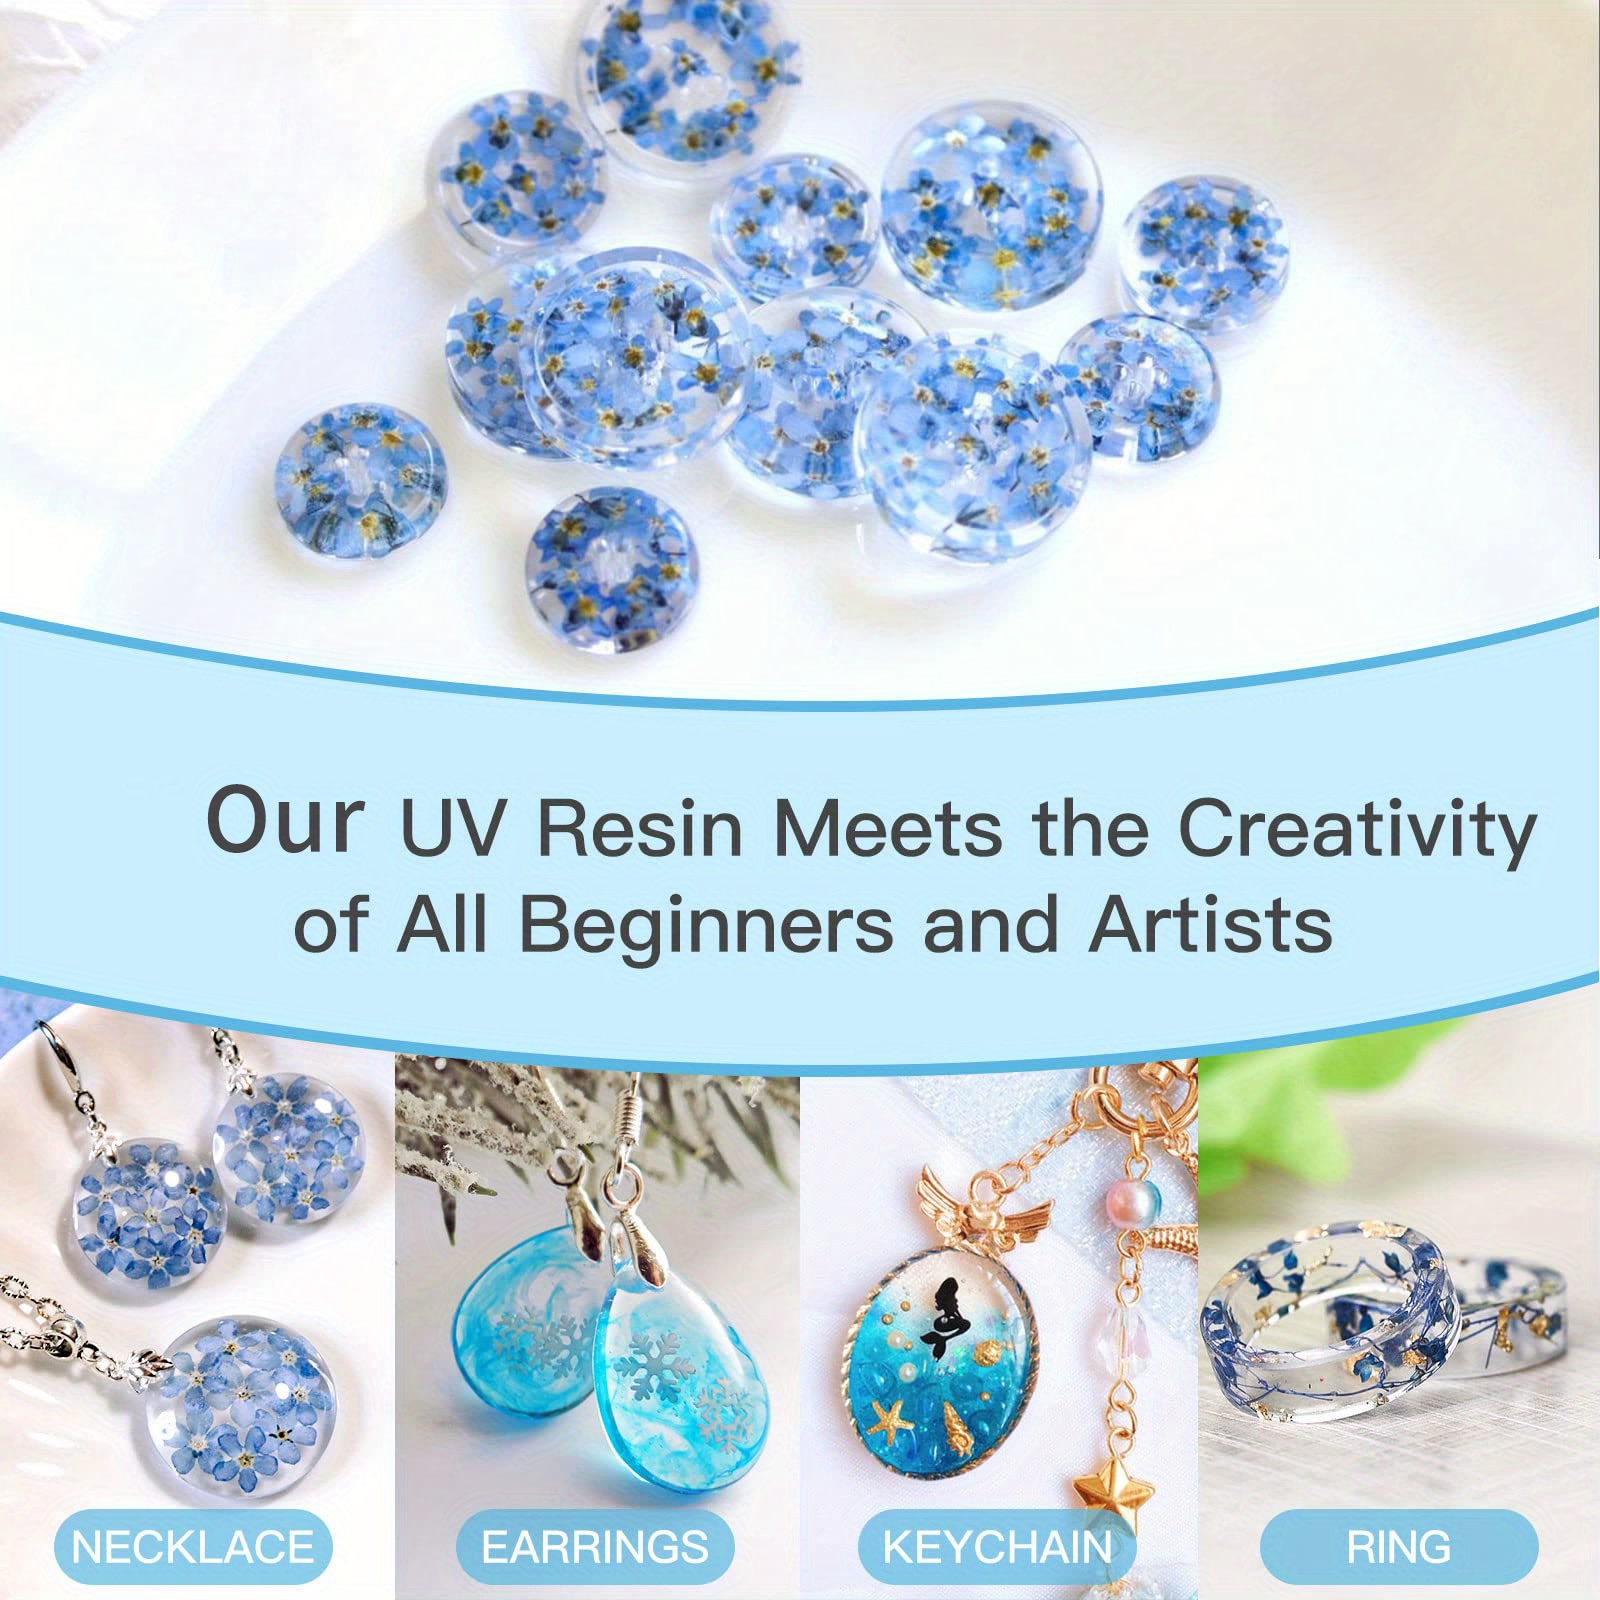 27 PCS UV Resin Kit with Light - 200g Upgraded Hard Type Crystal Clear  Ultraviolet Curing UV Resin Kit, 36W Lamp Beads UV Light, UV Resin with  Light for Craft Jewelry Making